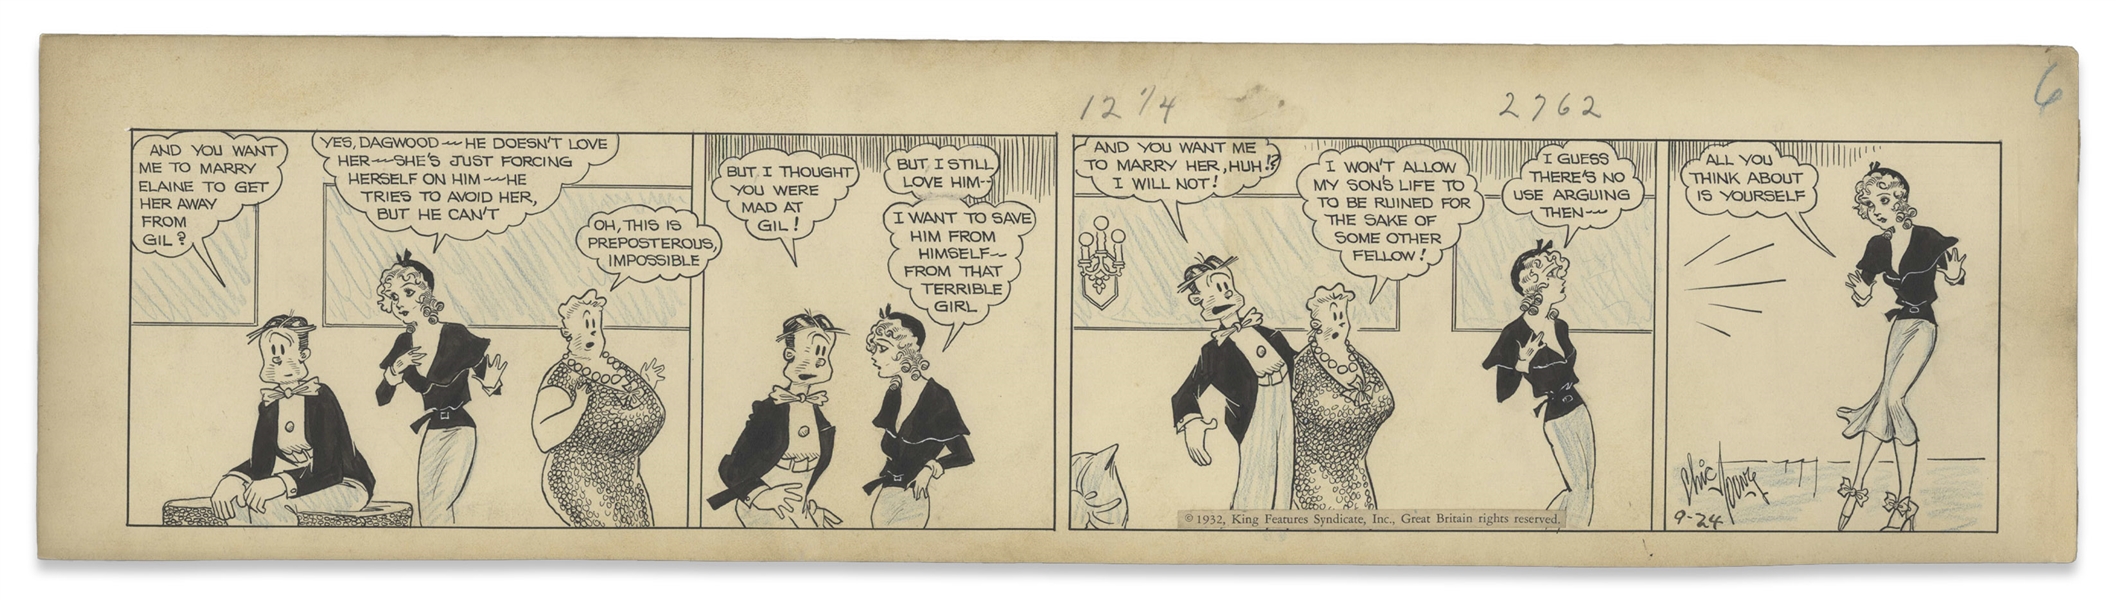 Chic Young Hand-Drawn ''Blondie'' Comic Strip From 1932 Titled ''A Selfish Family'' -- Blondie's Affections Turn Elsewhere